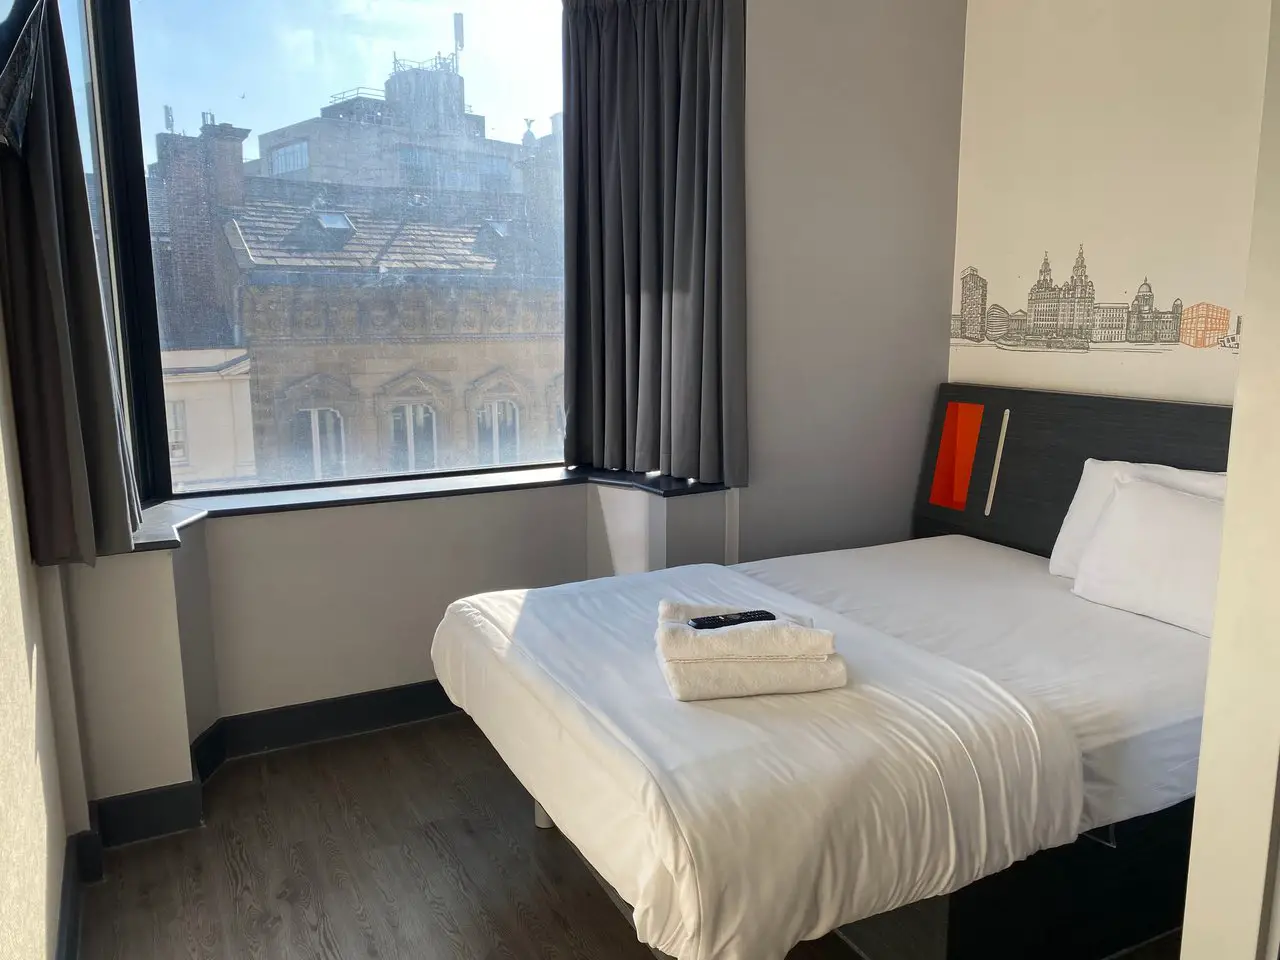 Inside a bedroom at the EasyHotel in Liverpool, showing a double bed with white sheets and a window looking out to Georgian buildings